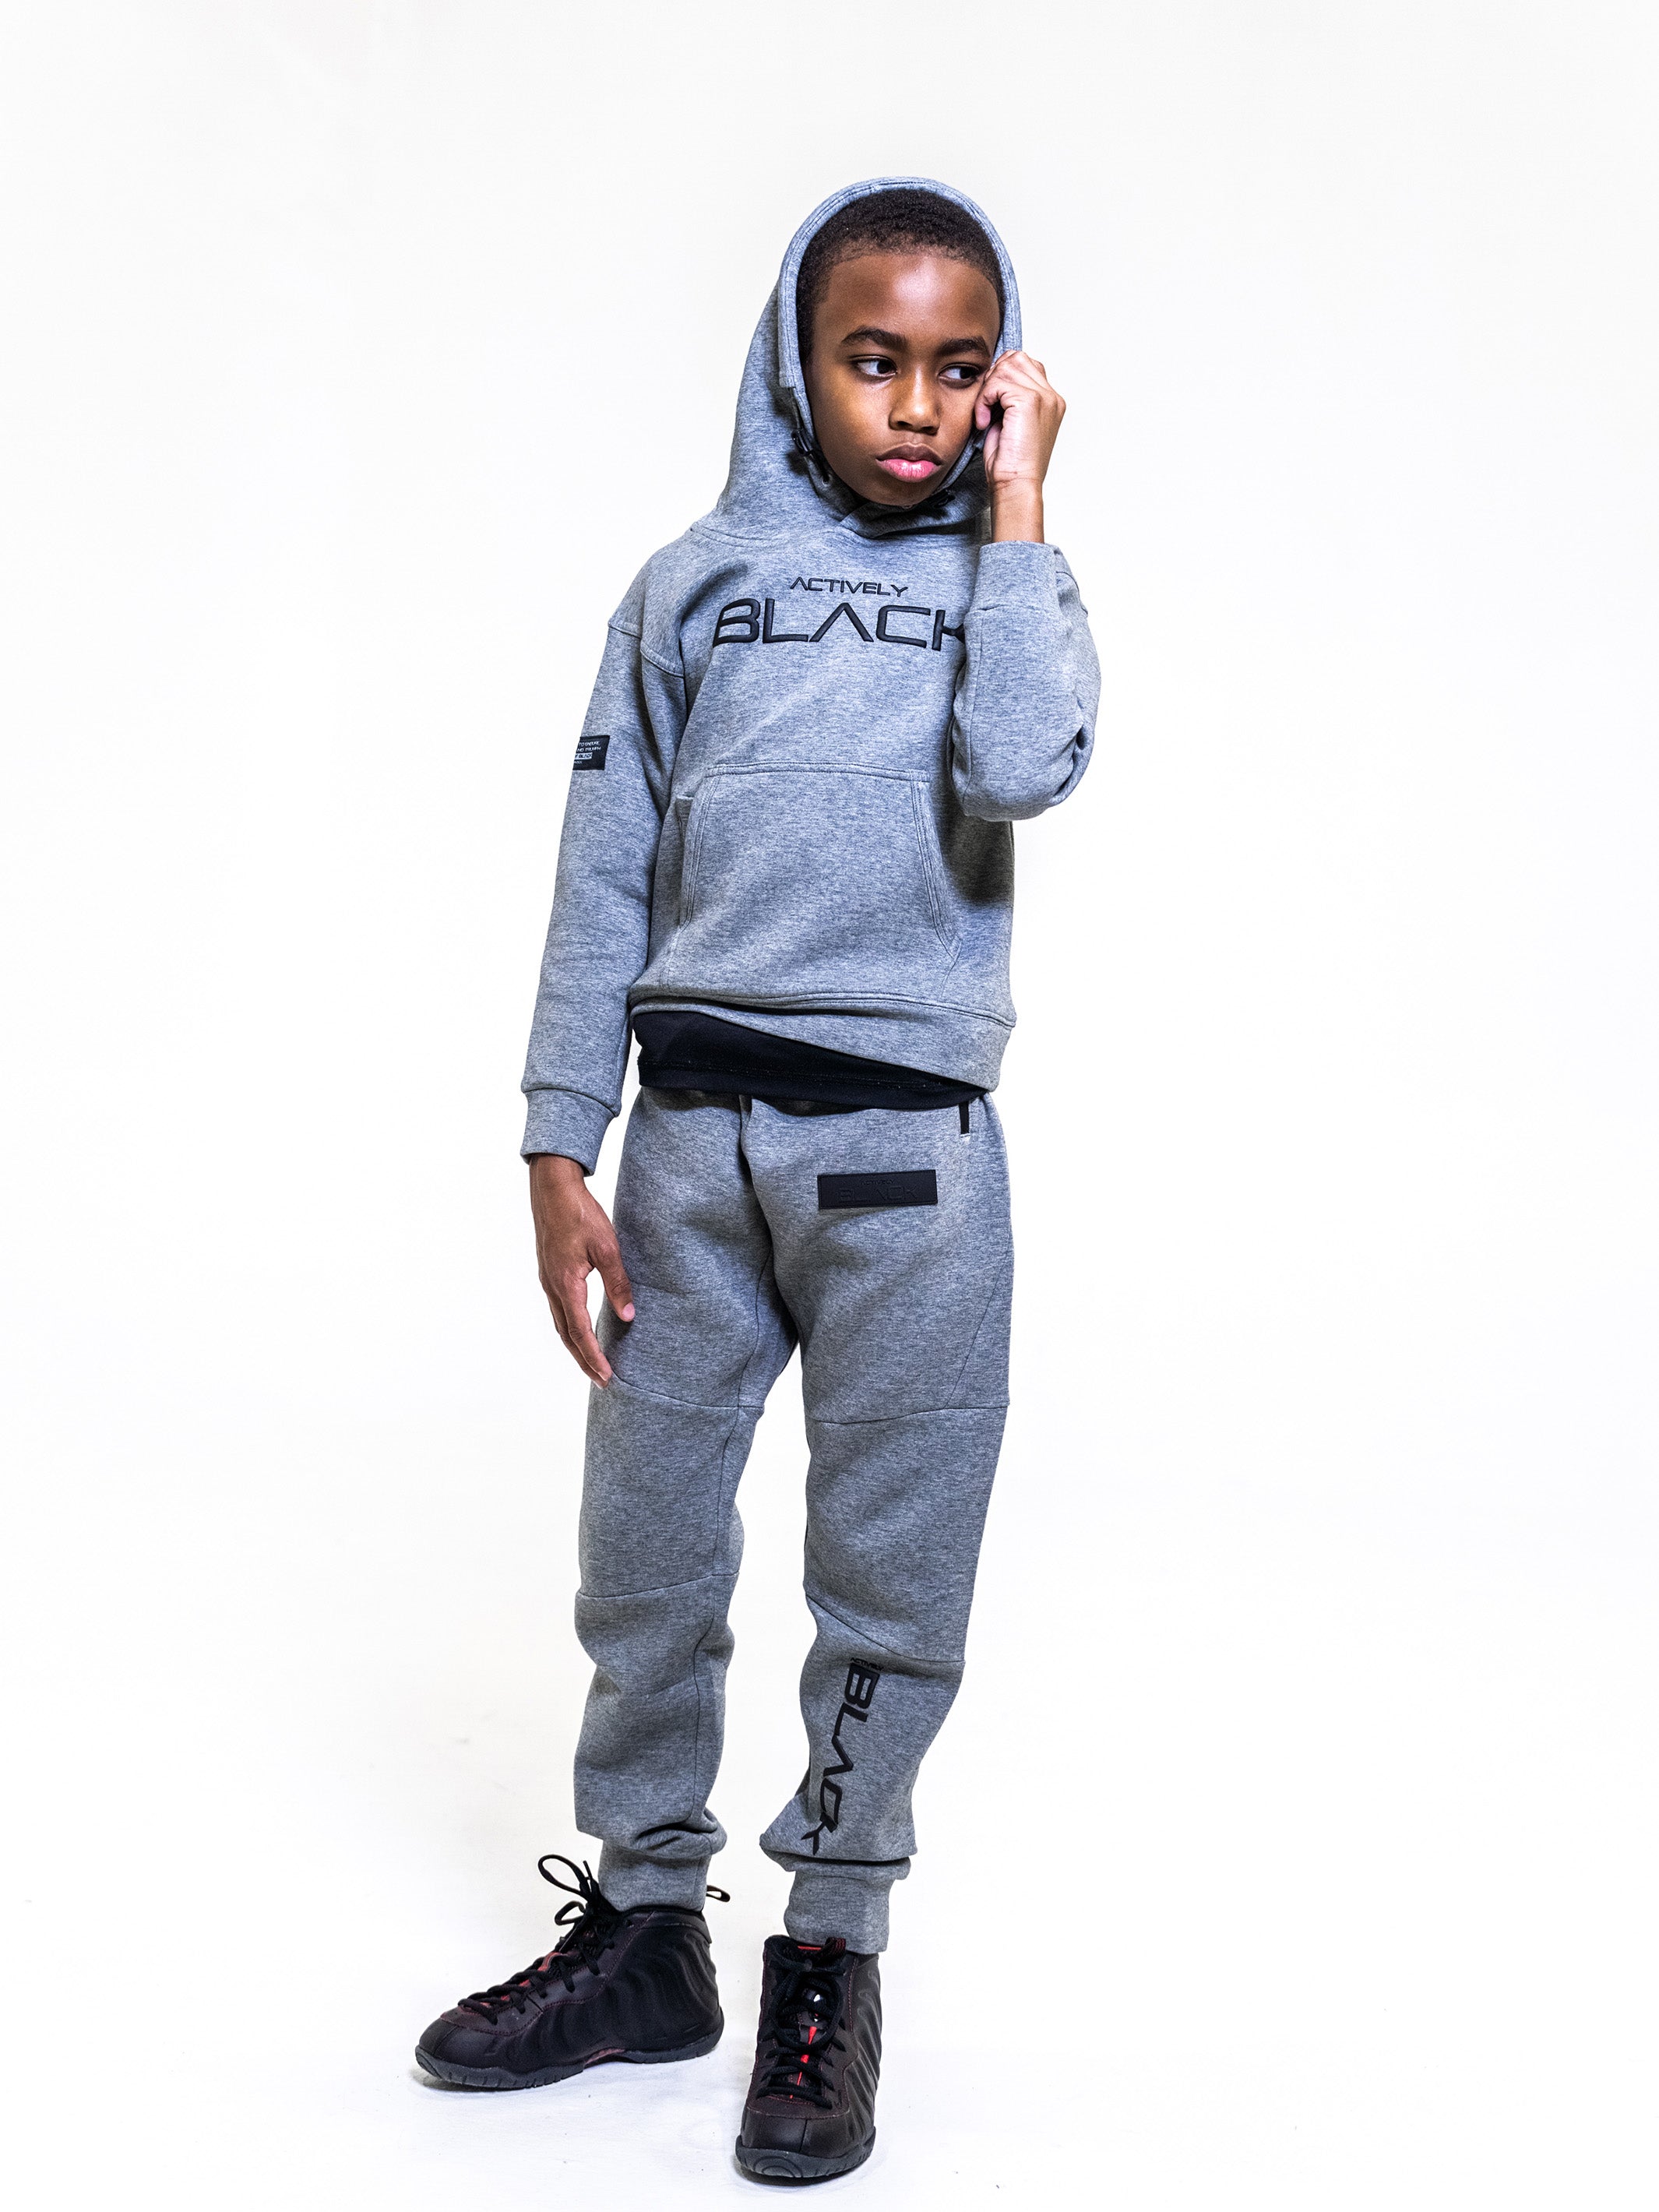 Kids Actively Black Performance Tech Joggers